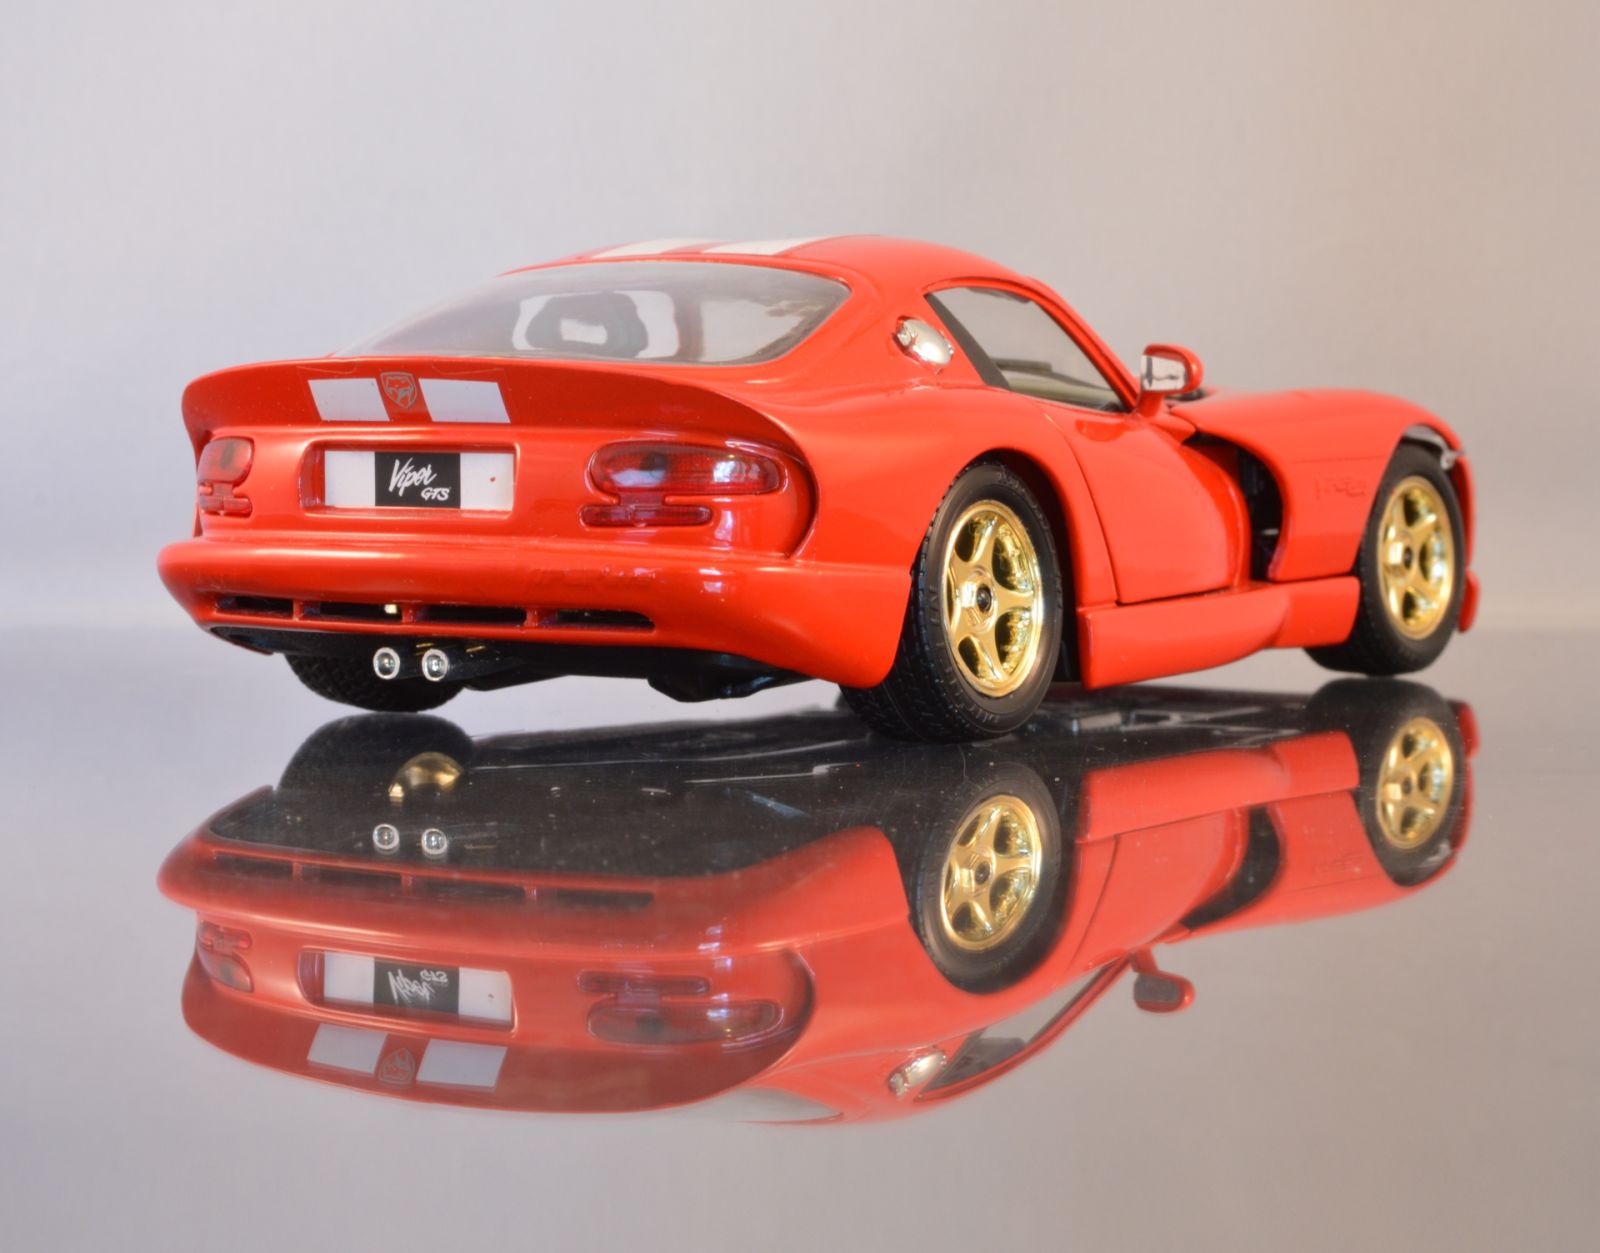 Illustration for article titled My first Bburago - 1997 Viper GTS